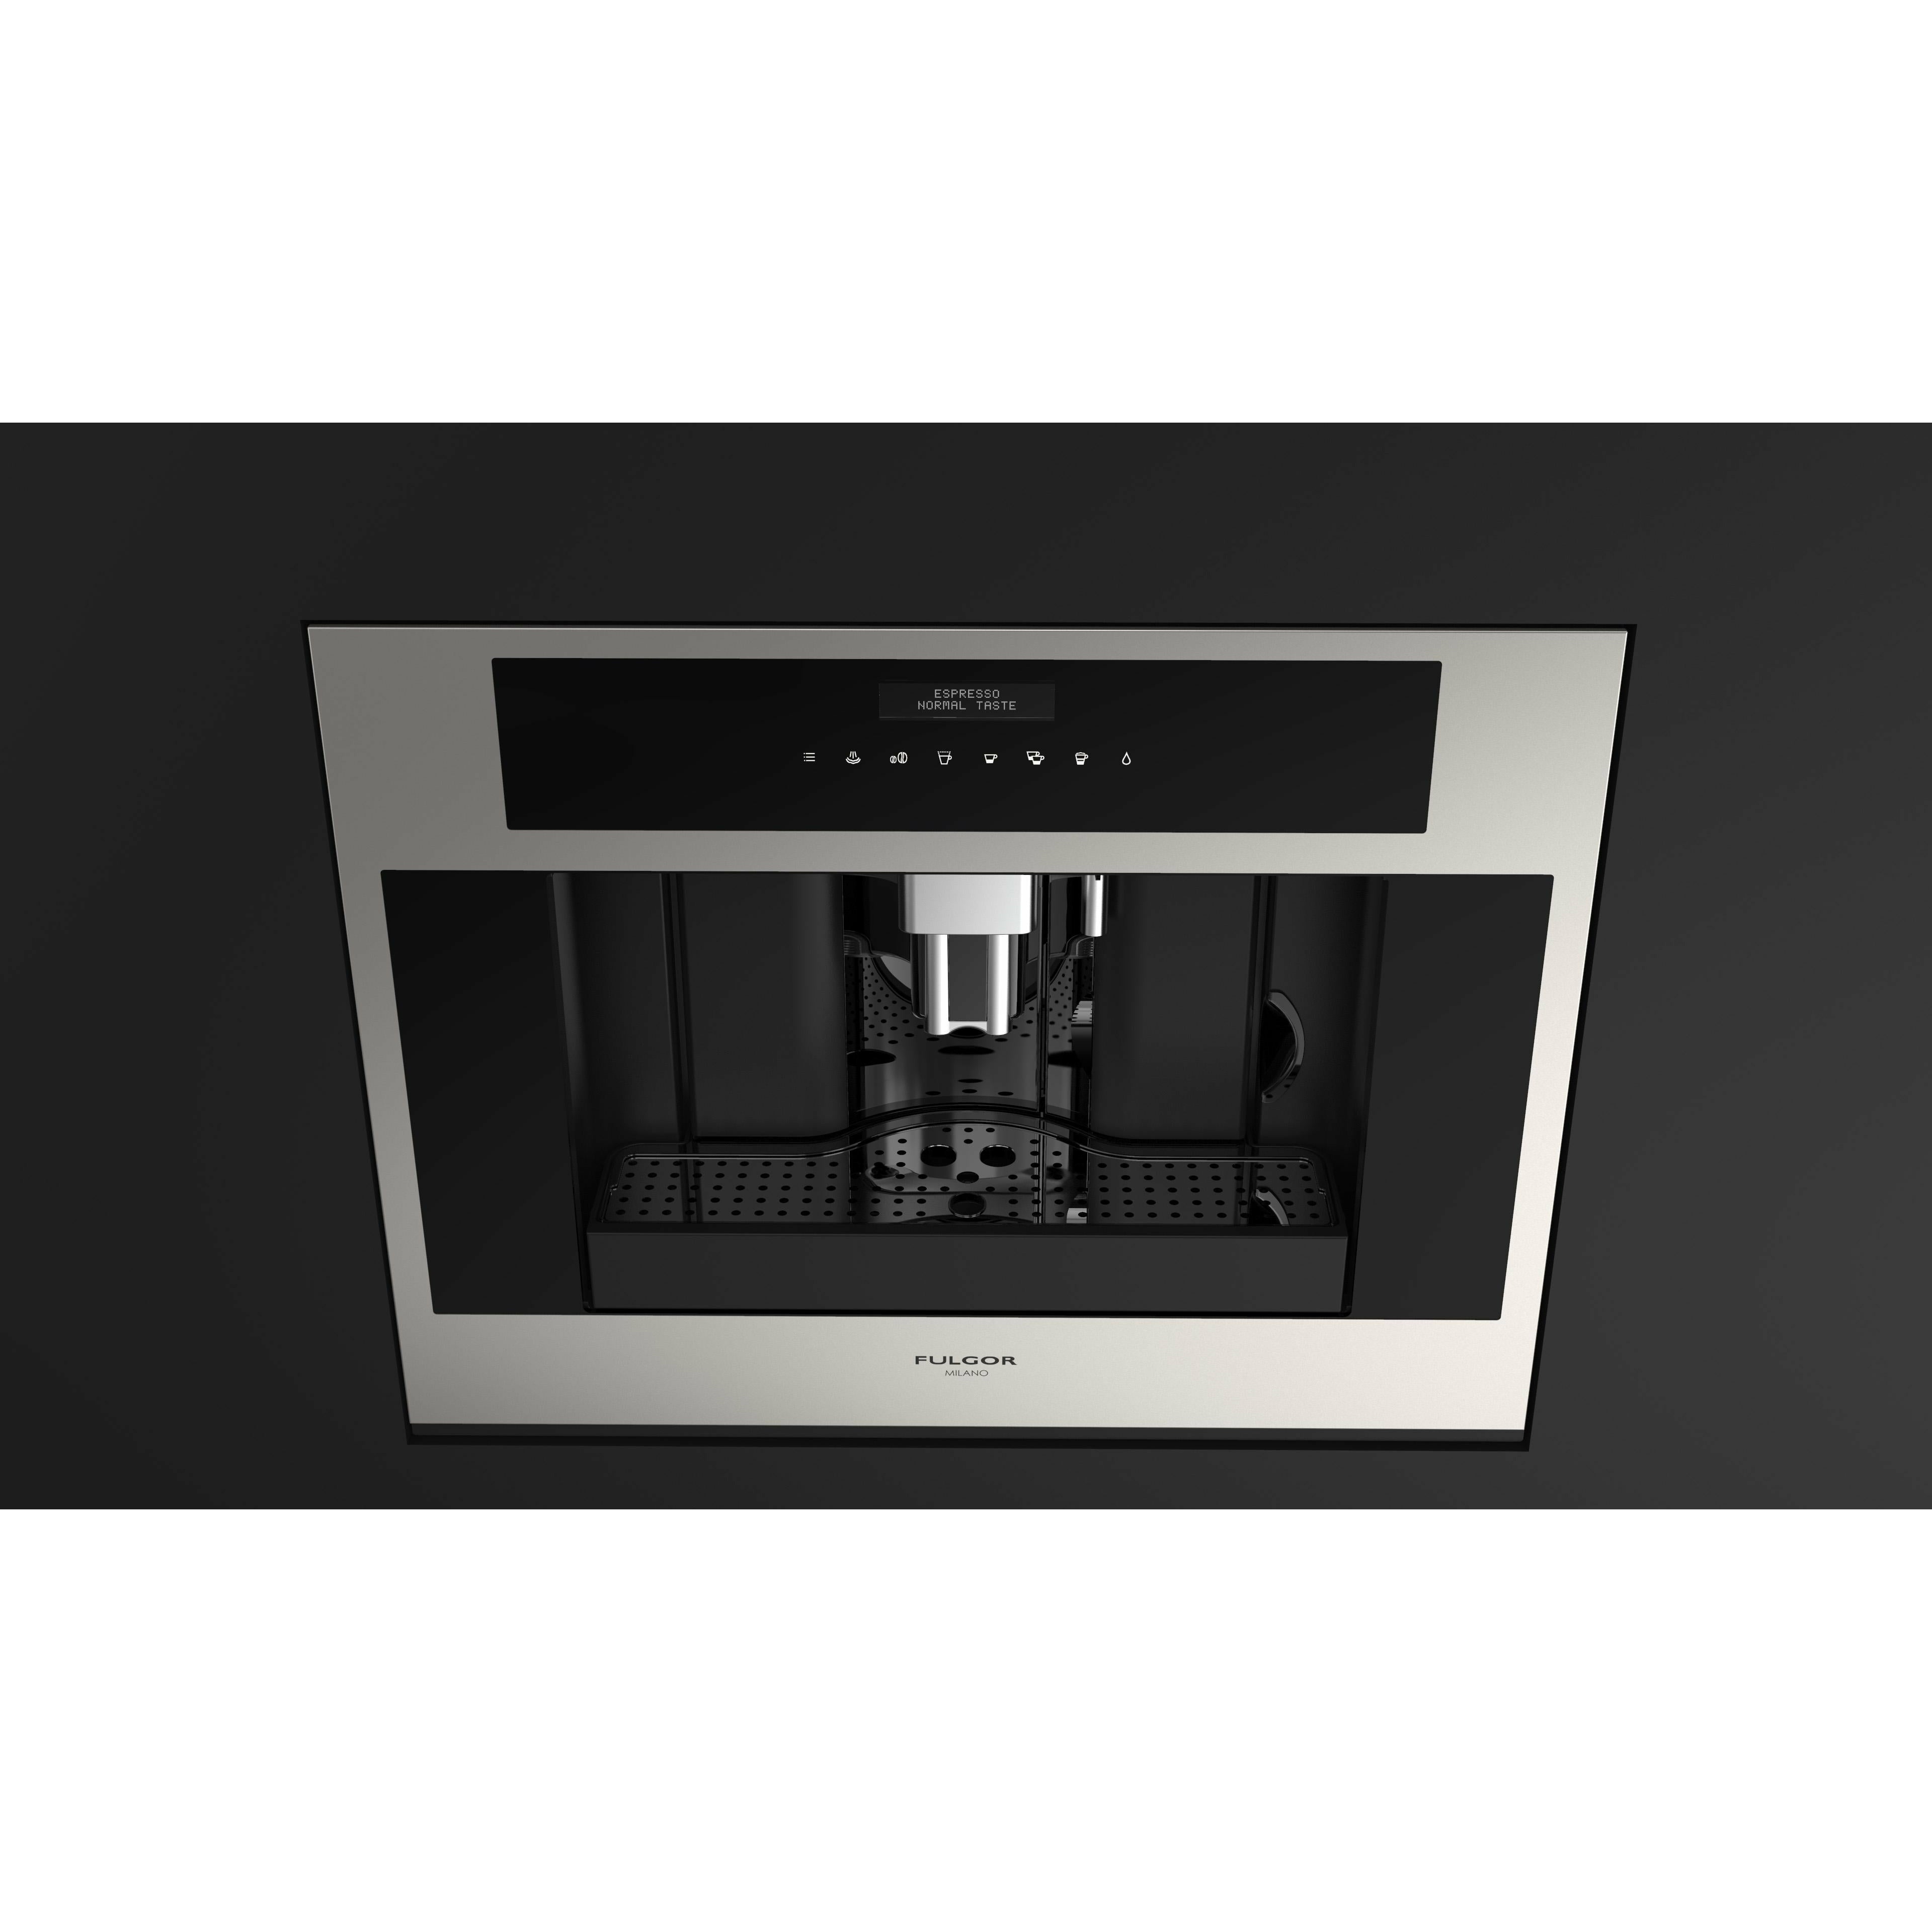 Fulgor Milano 24" Built-In Fully Automatic Coffee Machine, Stainless Steel - F7BC24S1